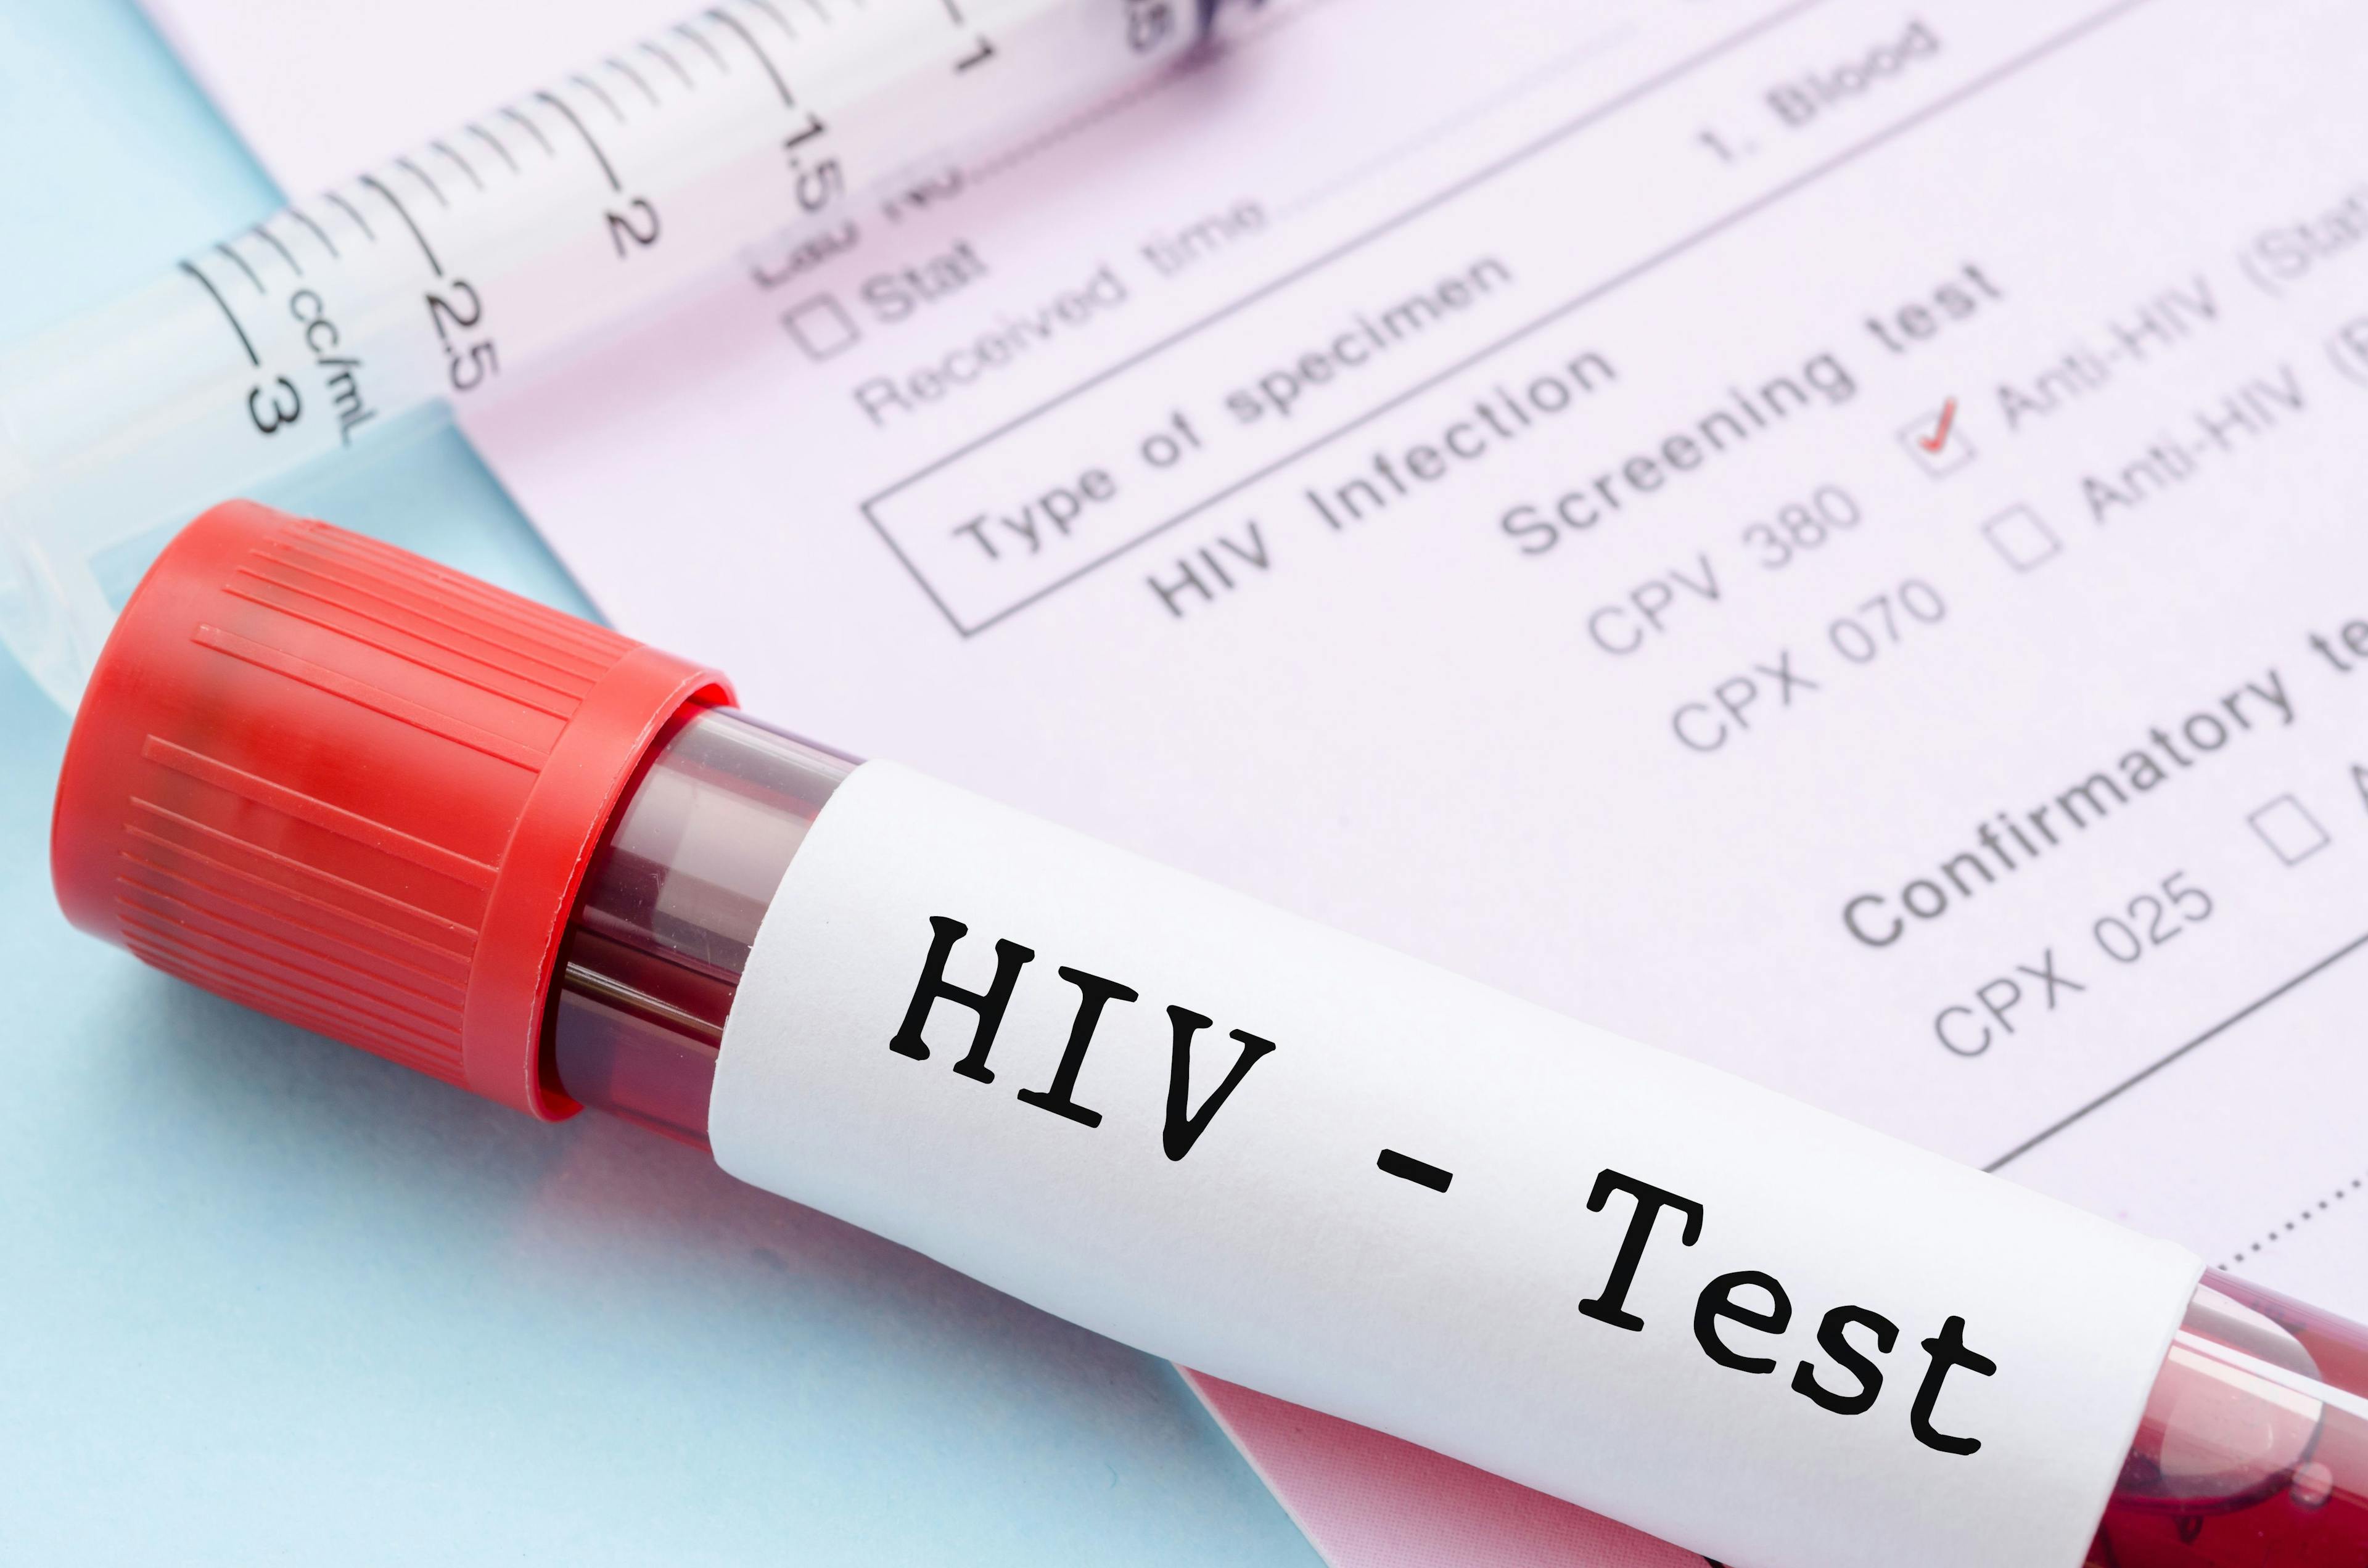 Study: Individuals With HIV Have Higher Risk of Depression, Suicide